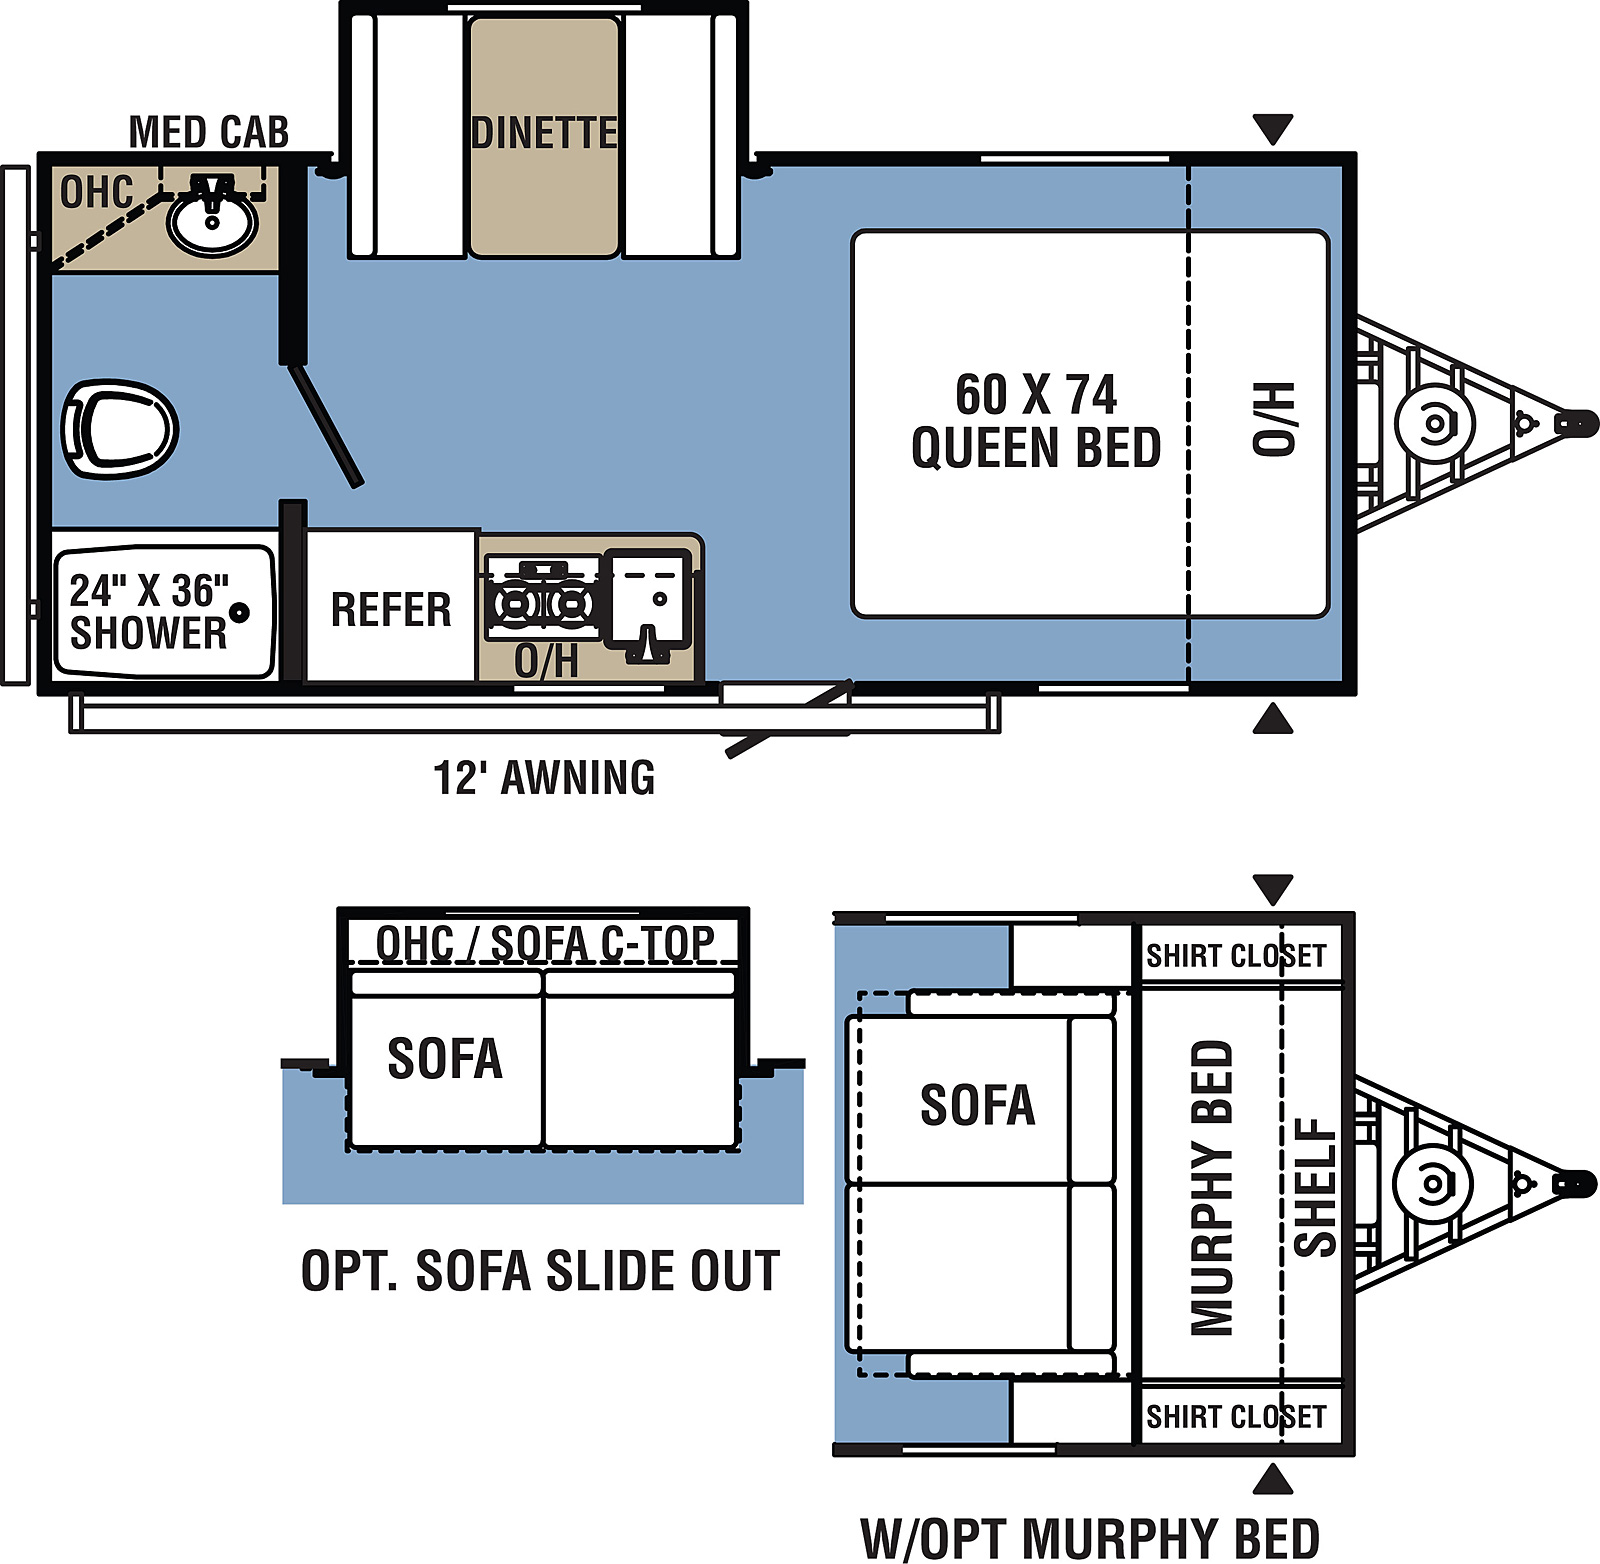 Clipper Ultra-Lite 17FQS floorplan. The 17FQS has one slide out and one entry door.